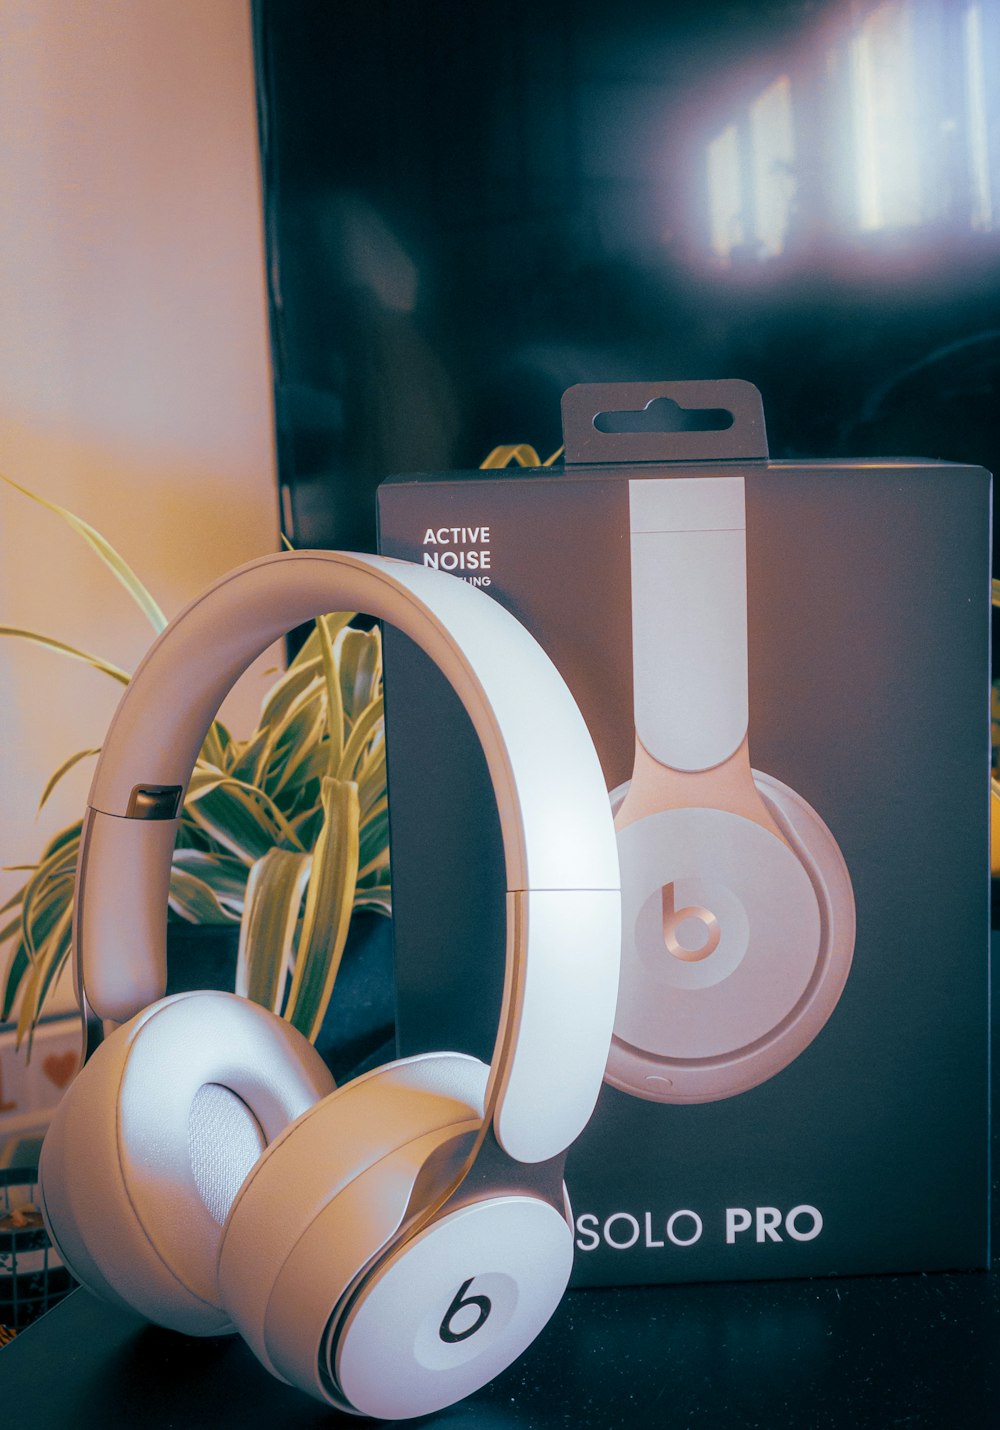 white and orange Beats Solo Pro by Dr. Dre with box